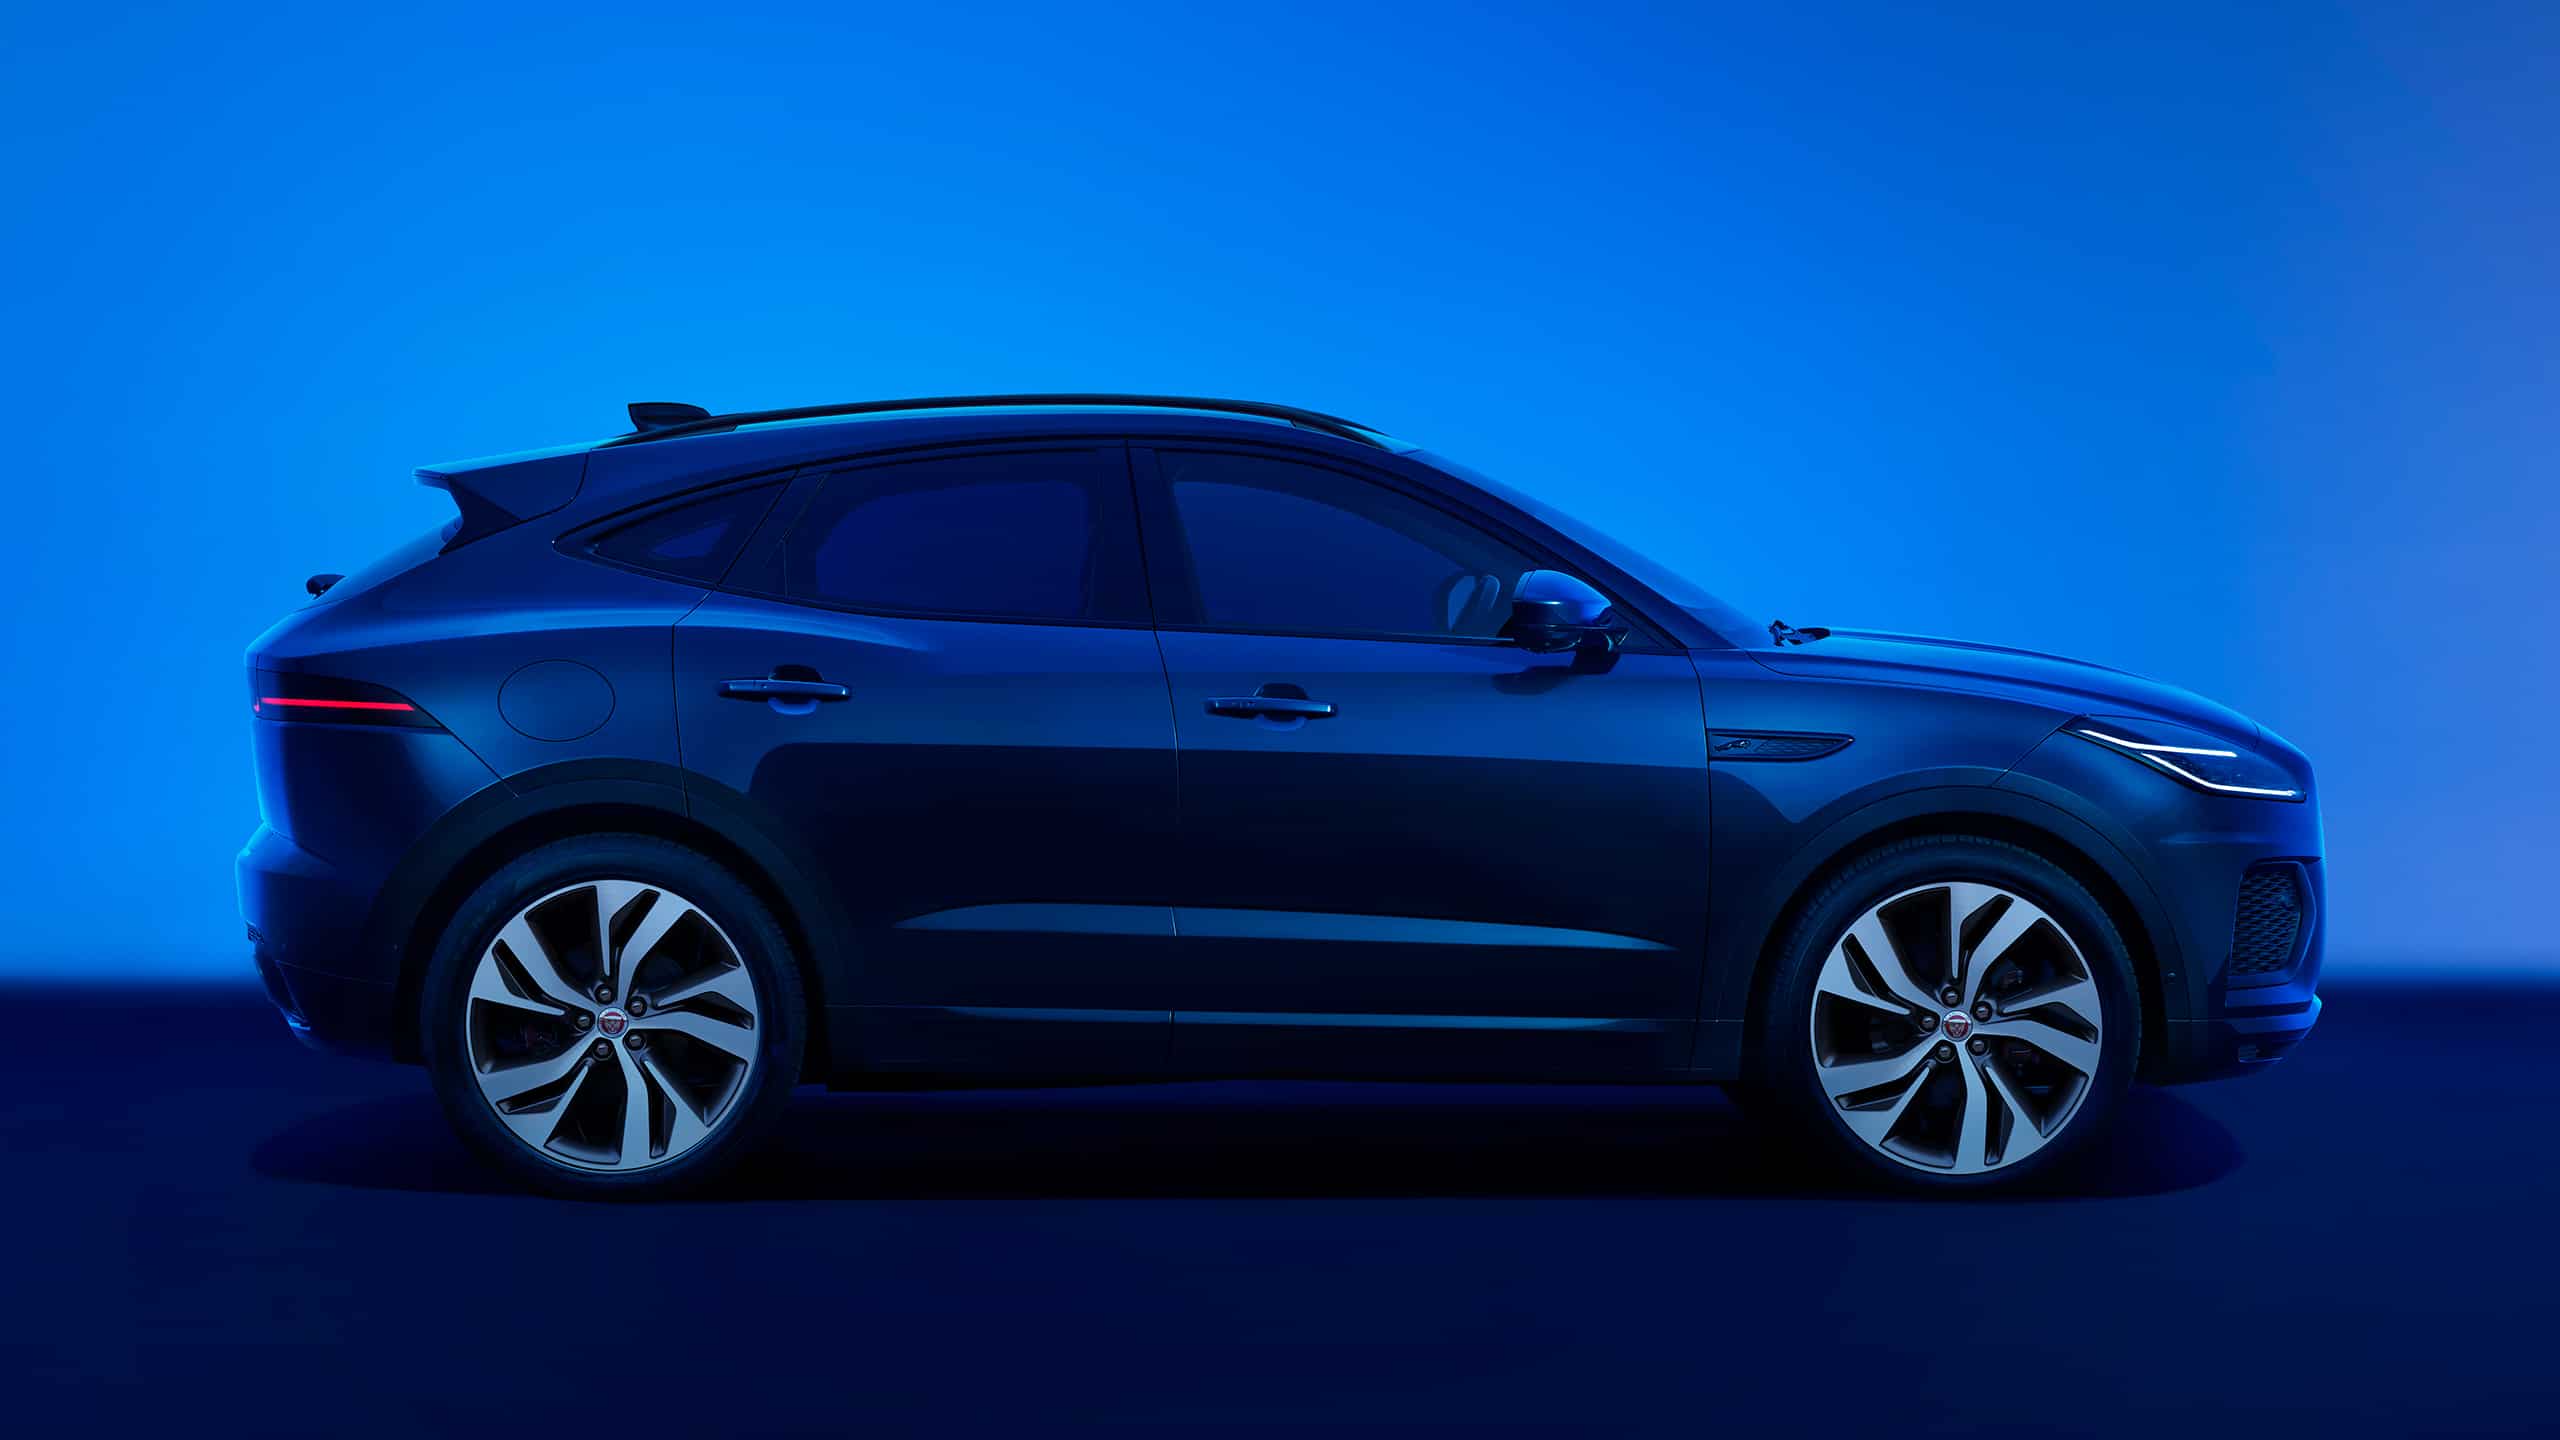 Representation of E-PACE on blue background